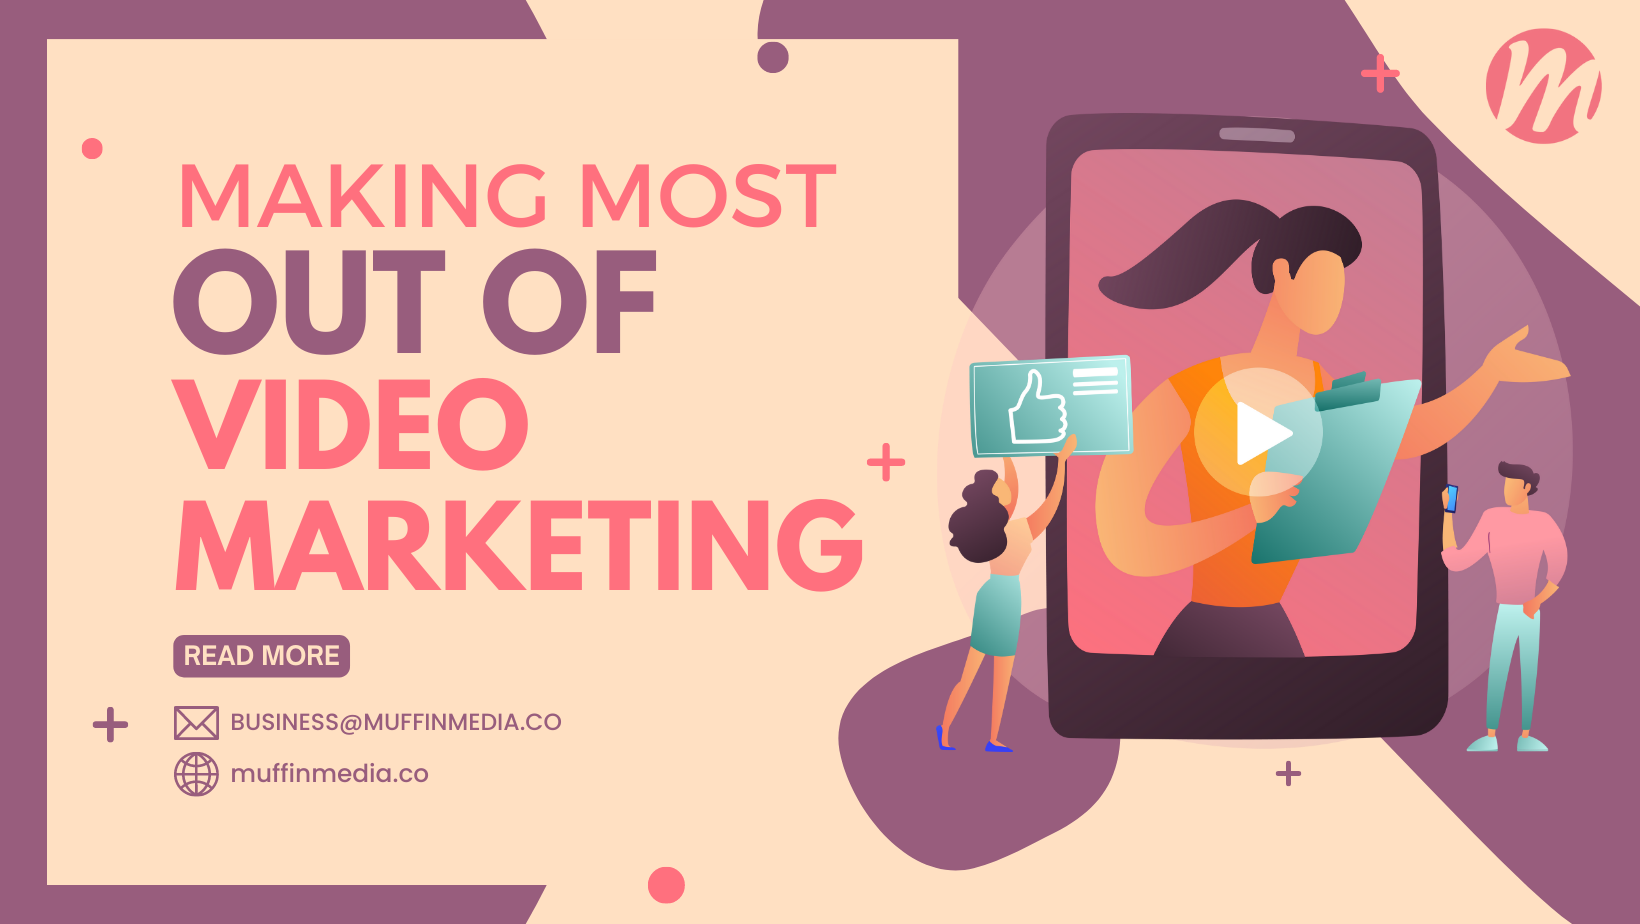 Making the most out of Video Marketing